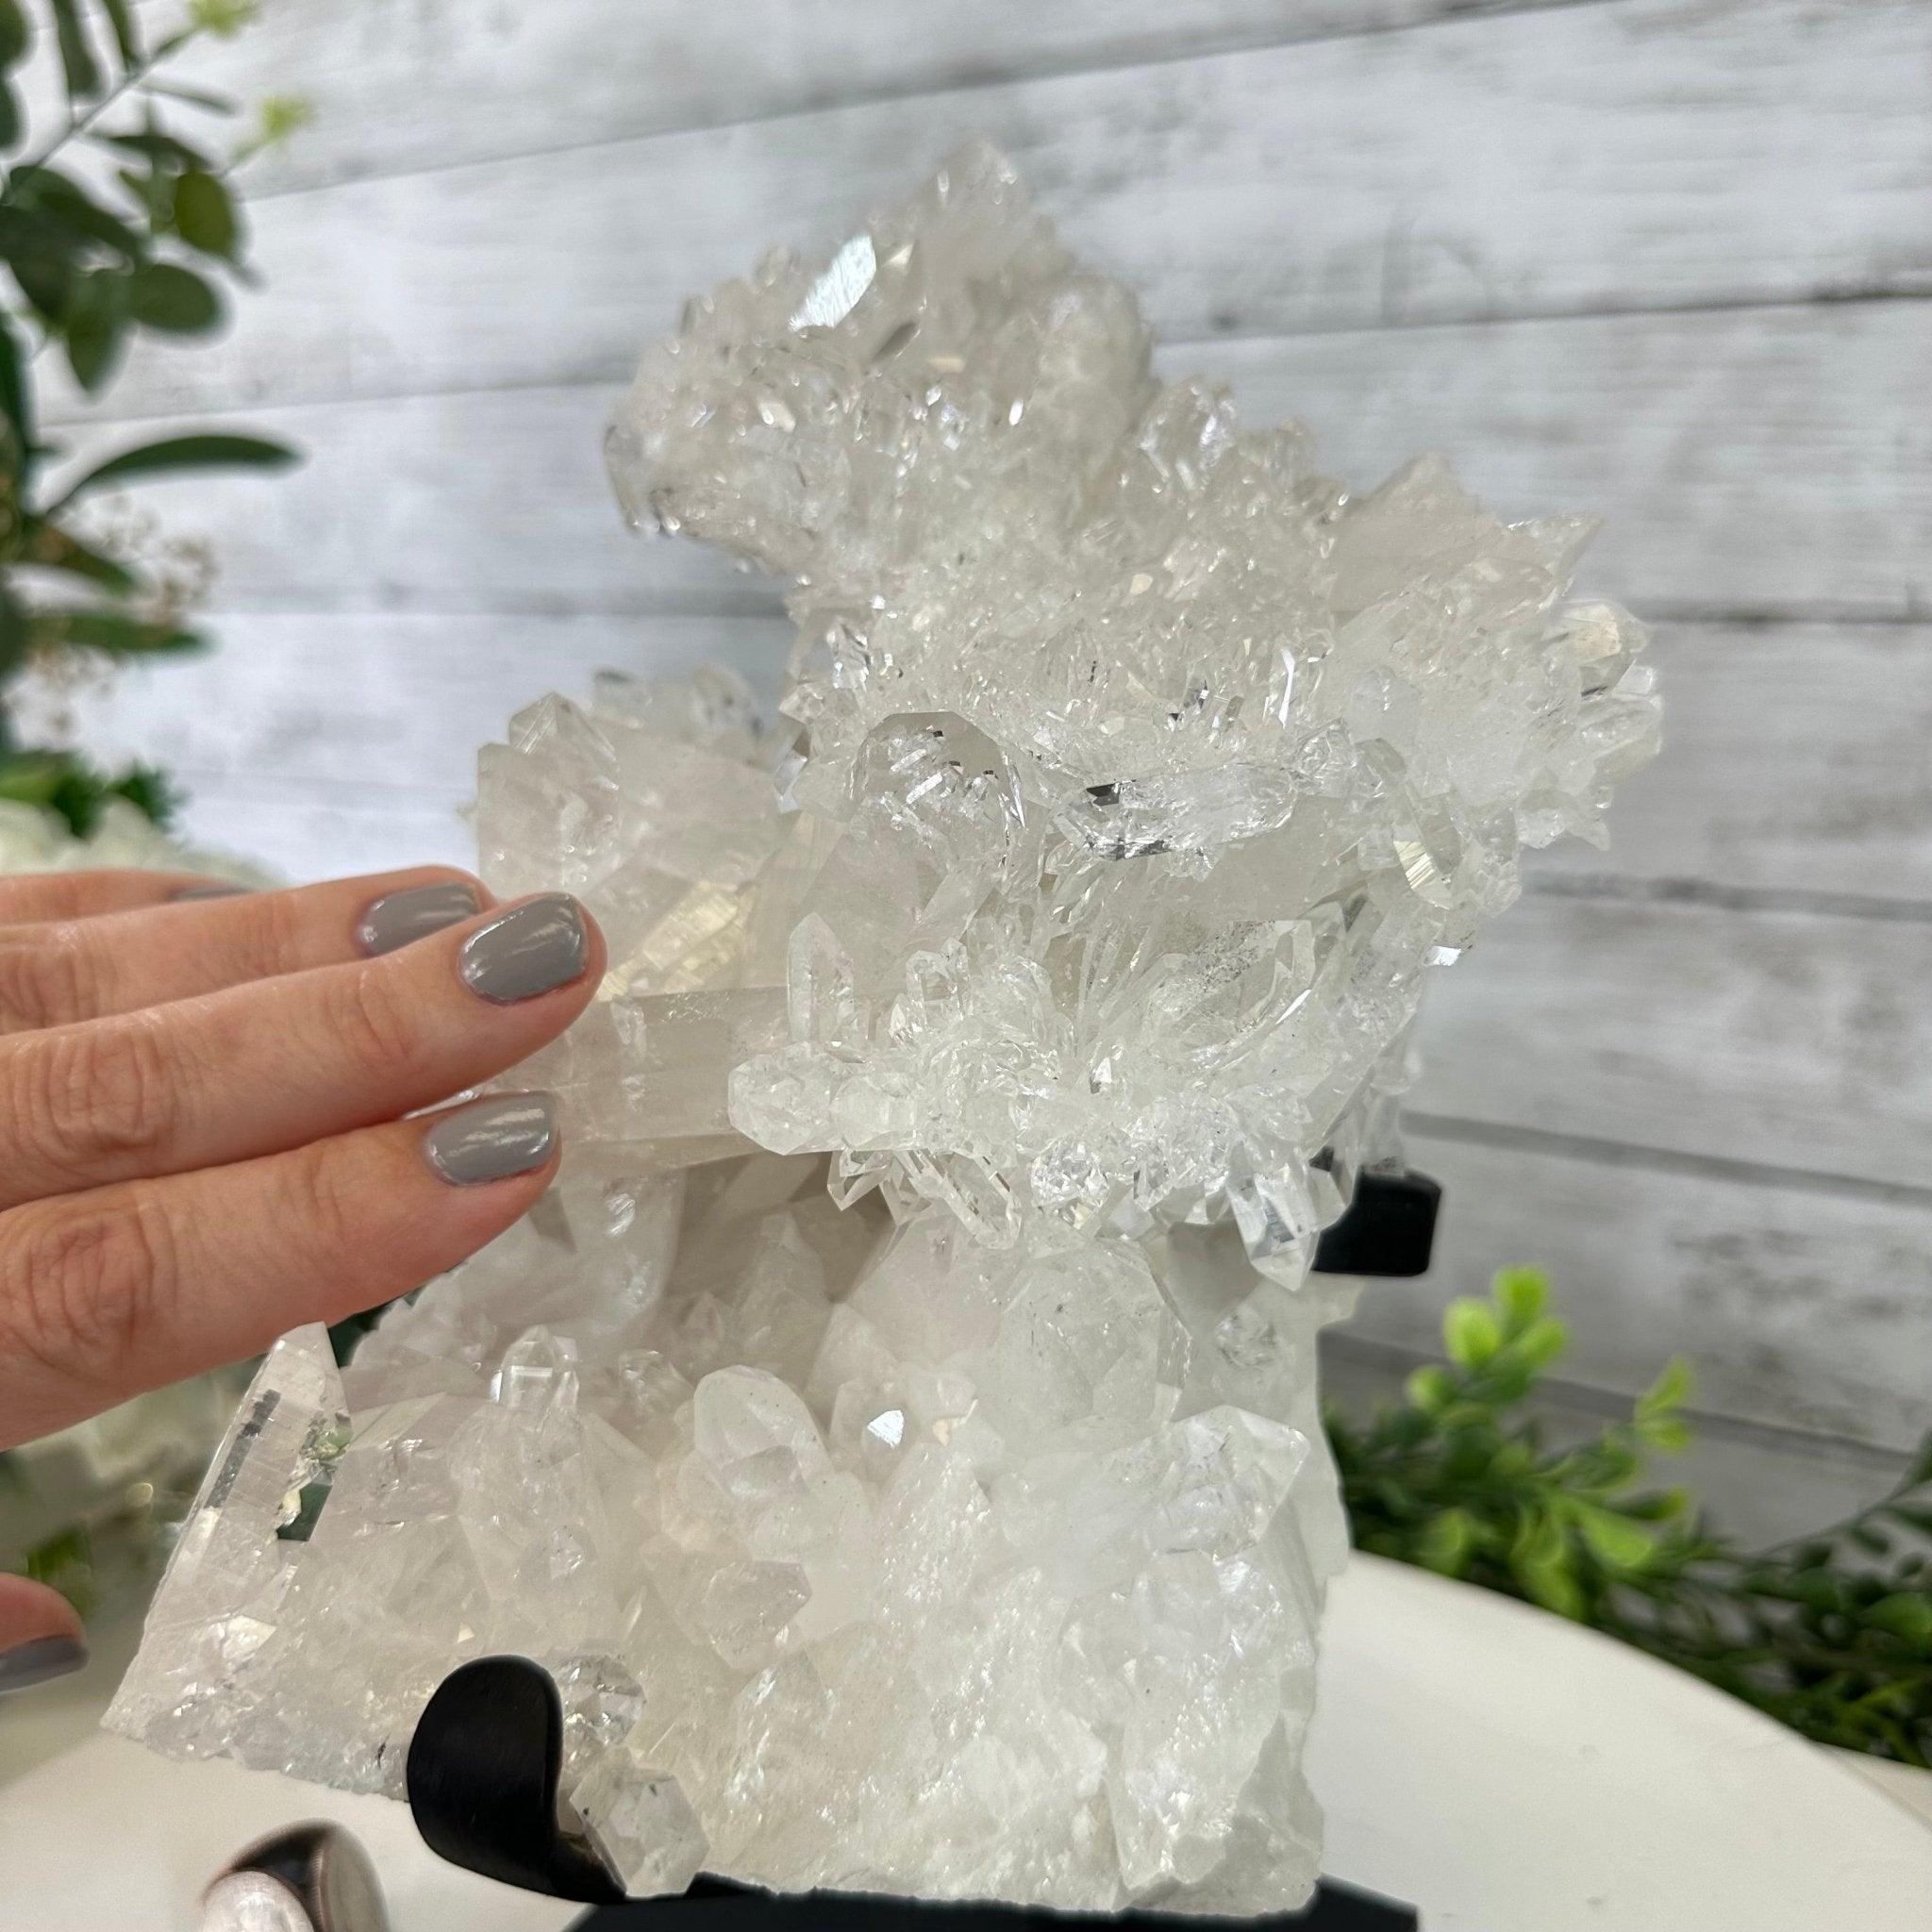 Super Quality Brazilian Clear Quartz Crystal Cluster, metal base, 8.1 lbs & 10" Tall #5495-0073 by Brazil Gems - Brazil GemsBrazil GemsSuper Quality Brazilian Clear Quartz Crystal Cluster, metal base, 8.1 lbs & 10" Tall #5495-0073 by Brazil GemsClusters on Fixed Bases5495-0073